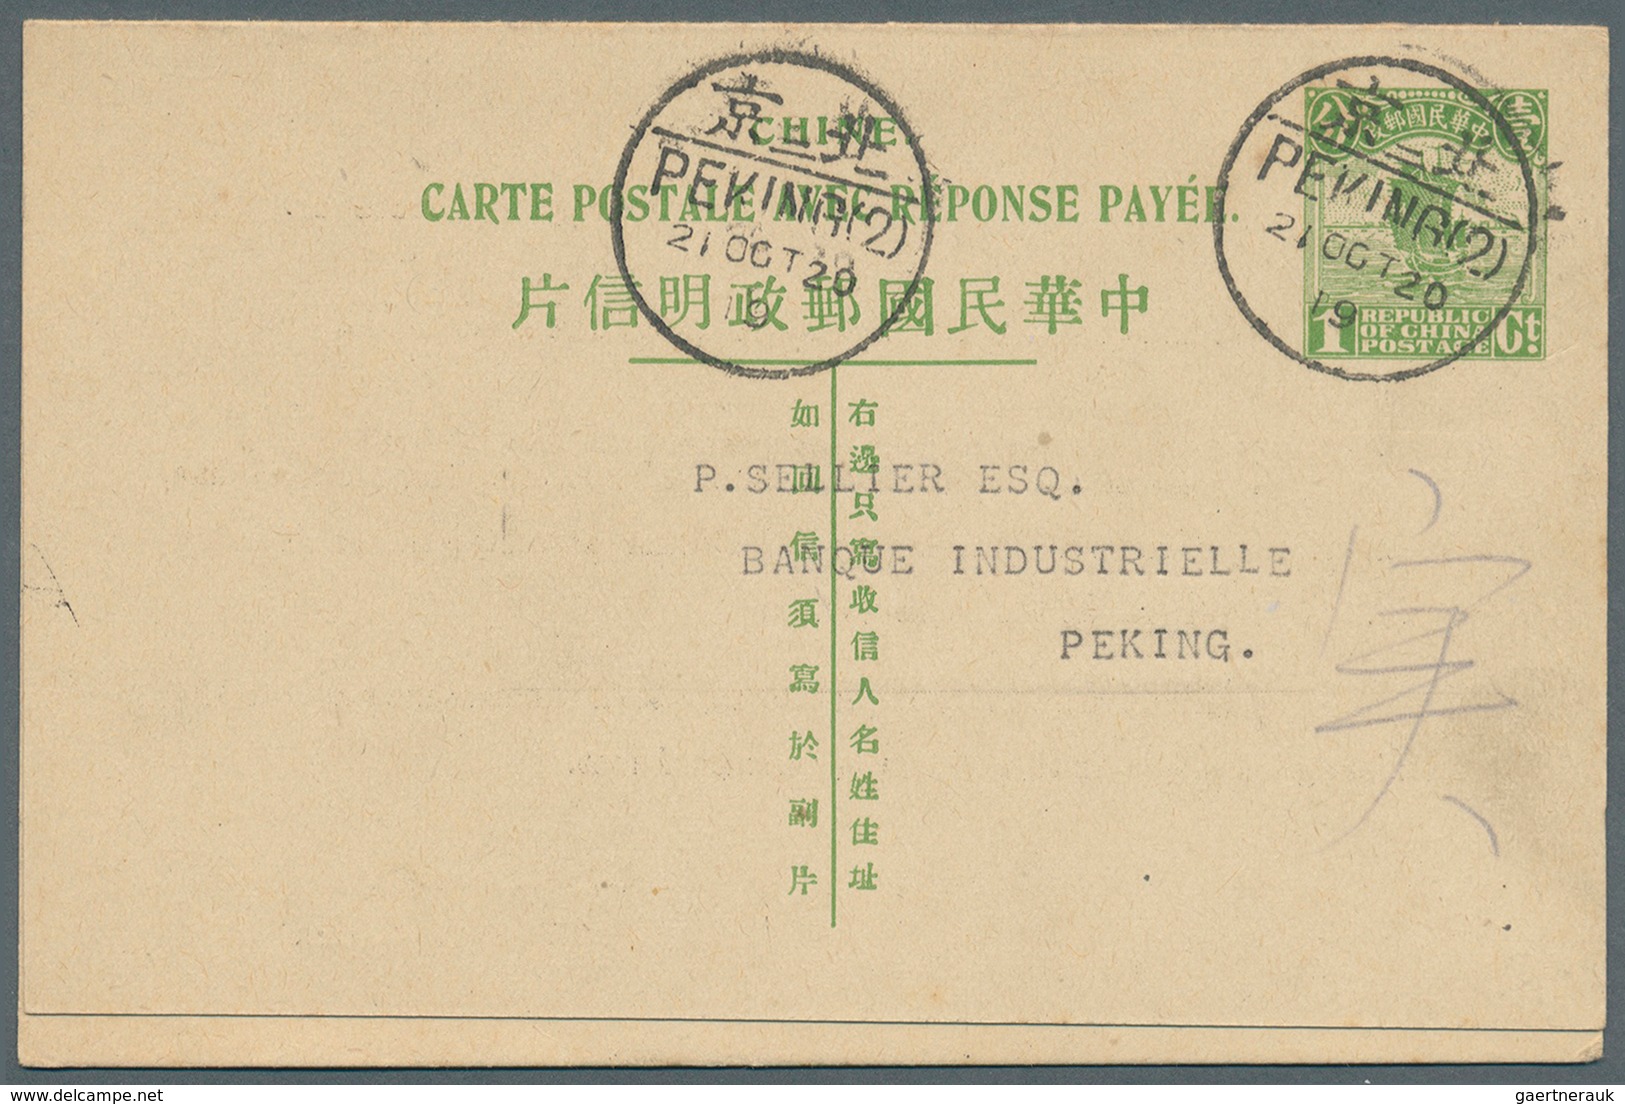 China - Ganzsachen: 1920. Chinese Imperial Post Postal Stationery Double Reply Card 'Junk' 1c Apple- - Postcards